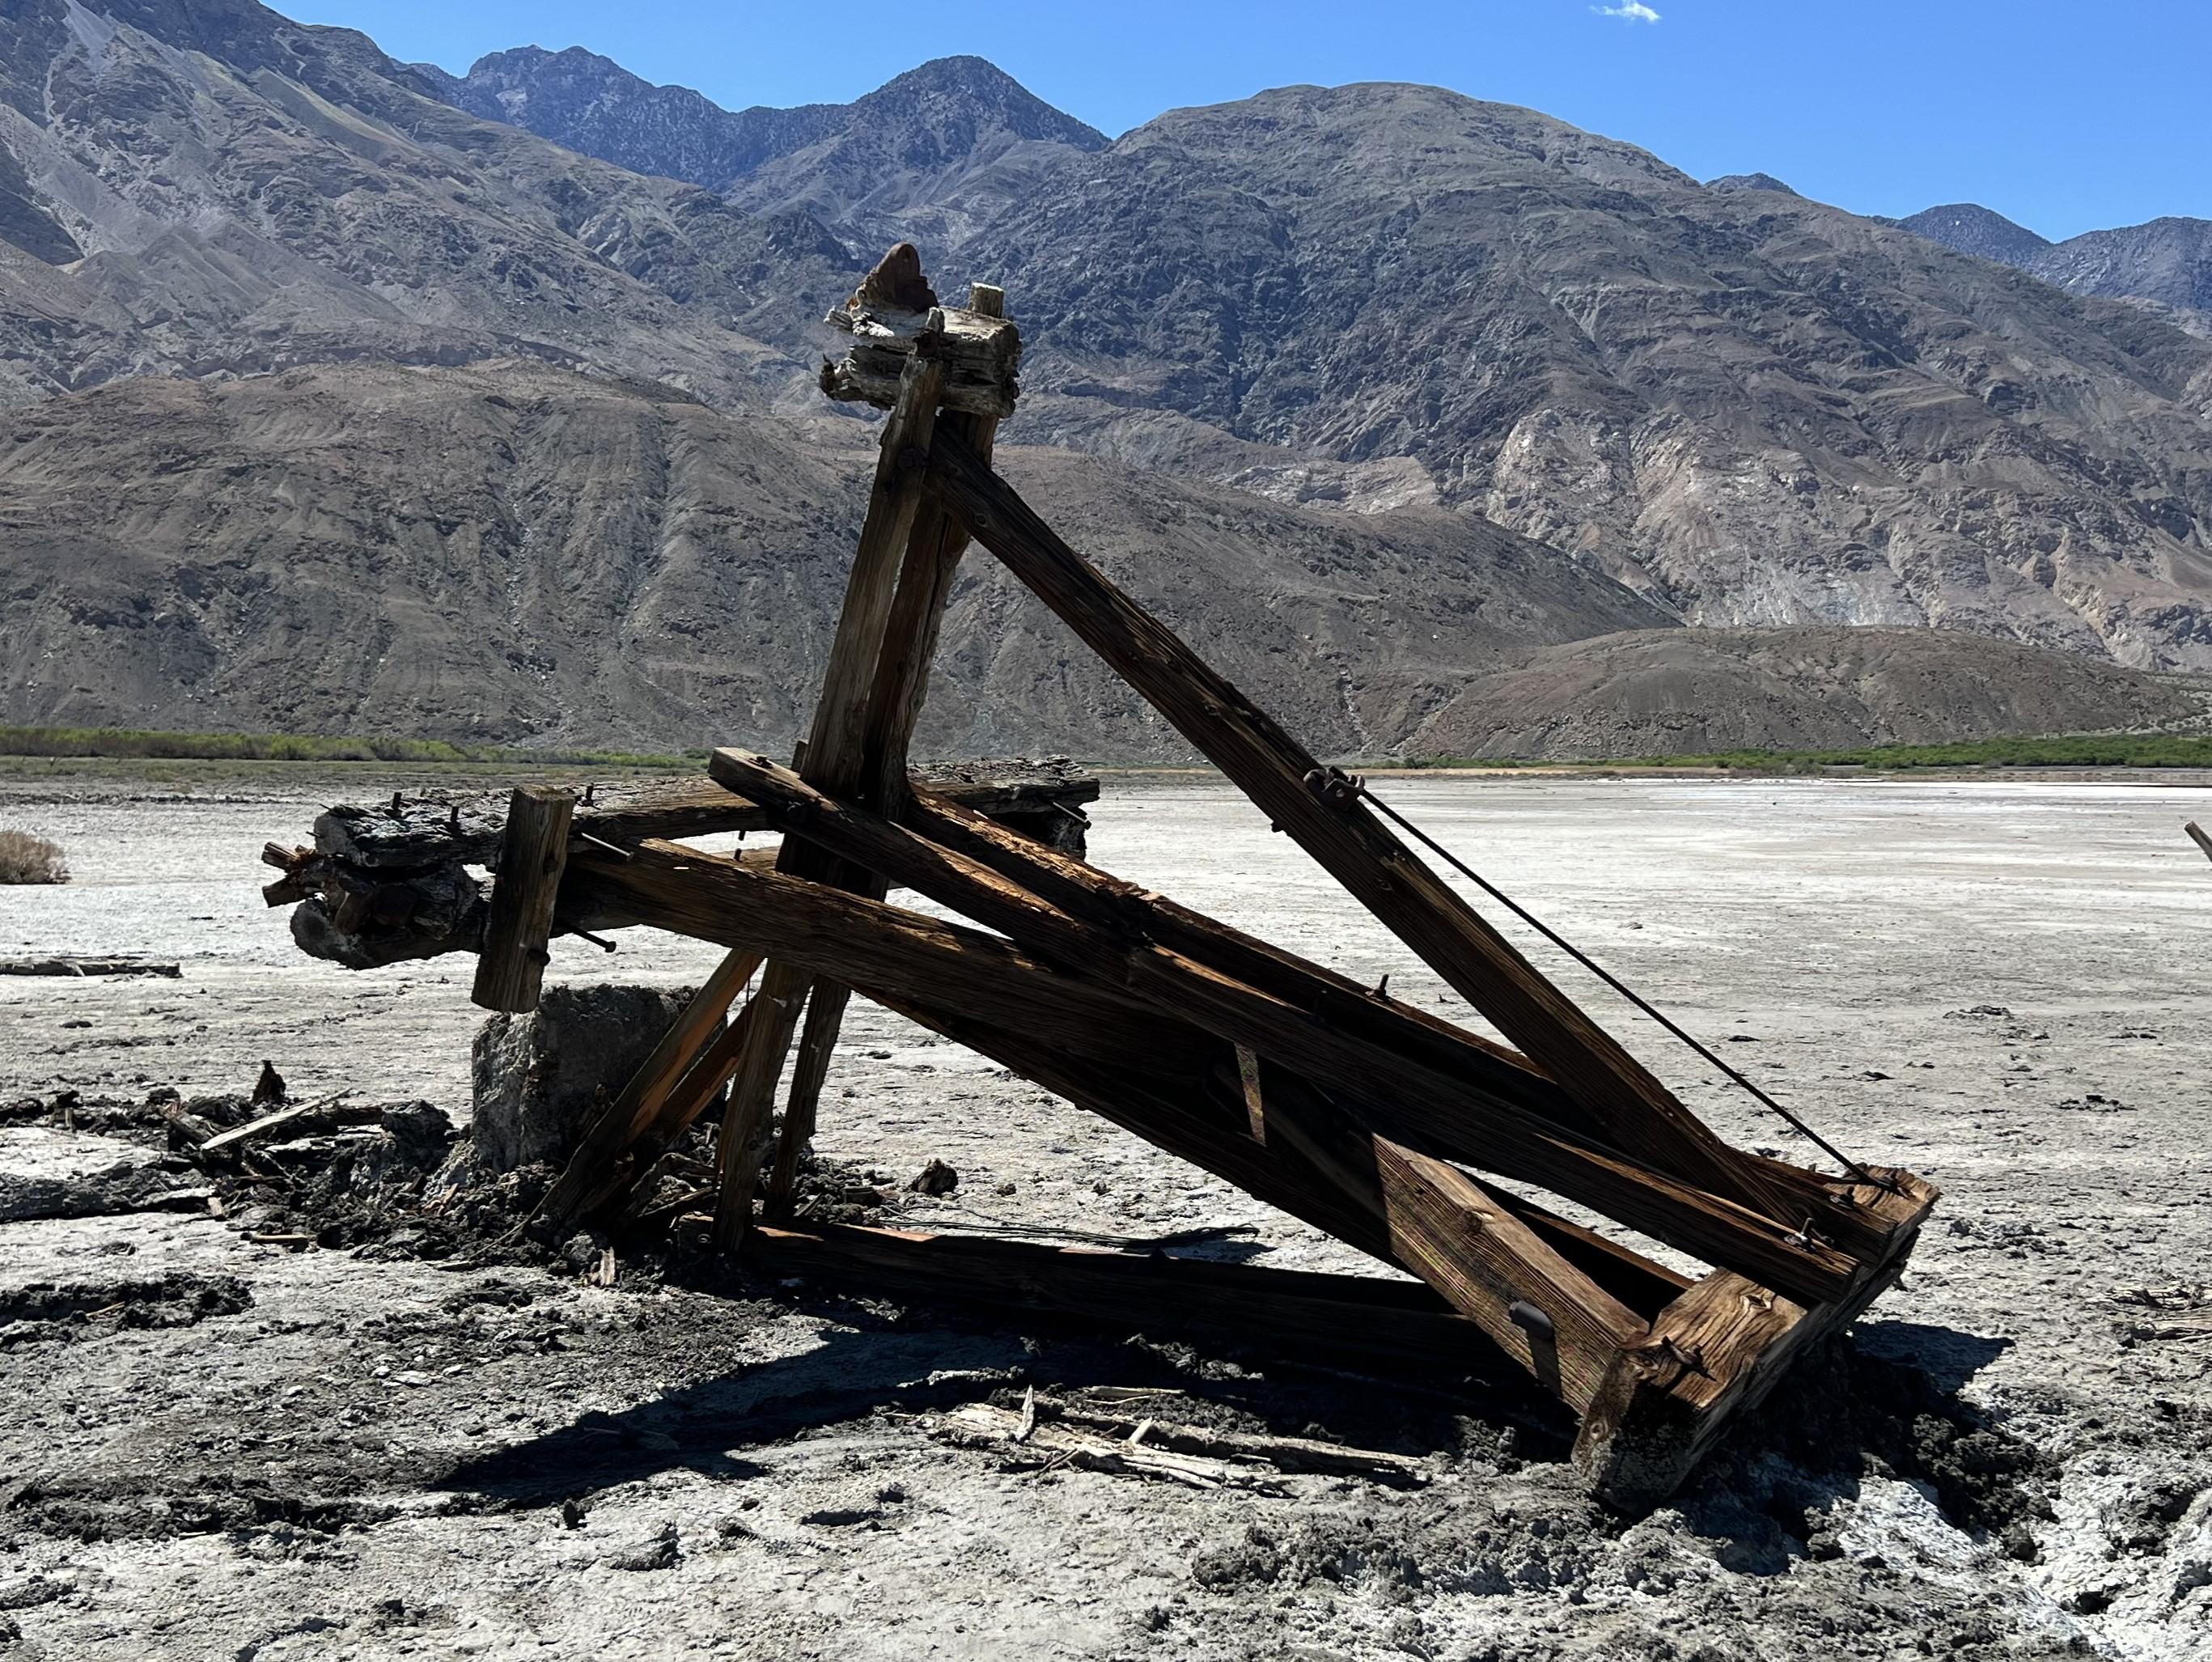 My Bad: Death Valley Visitor Turns Himself in After Toppling Historic Salt Tram Tower